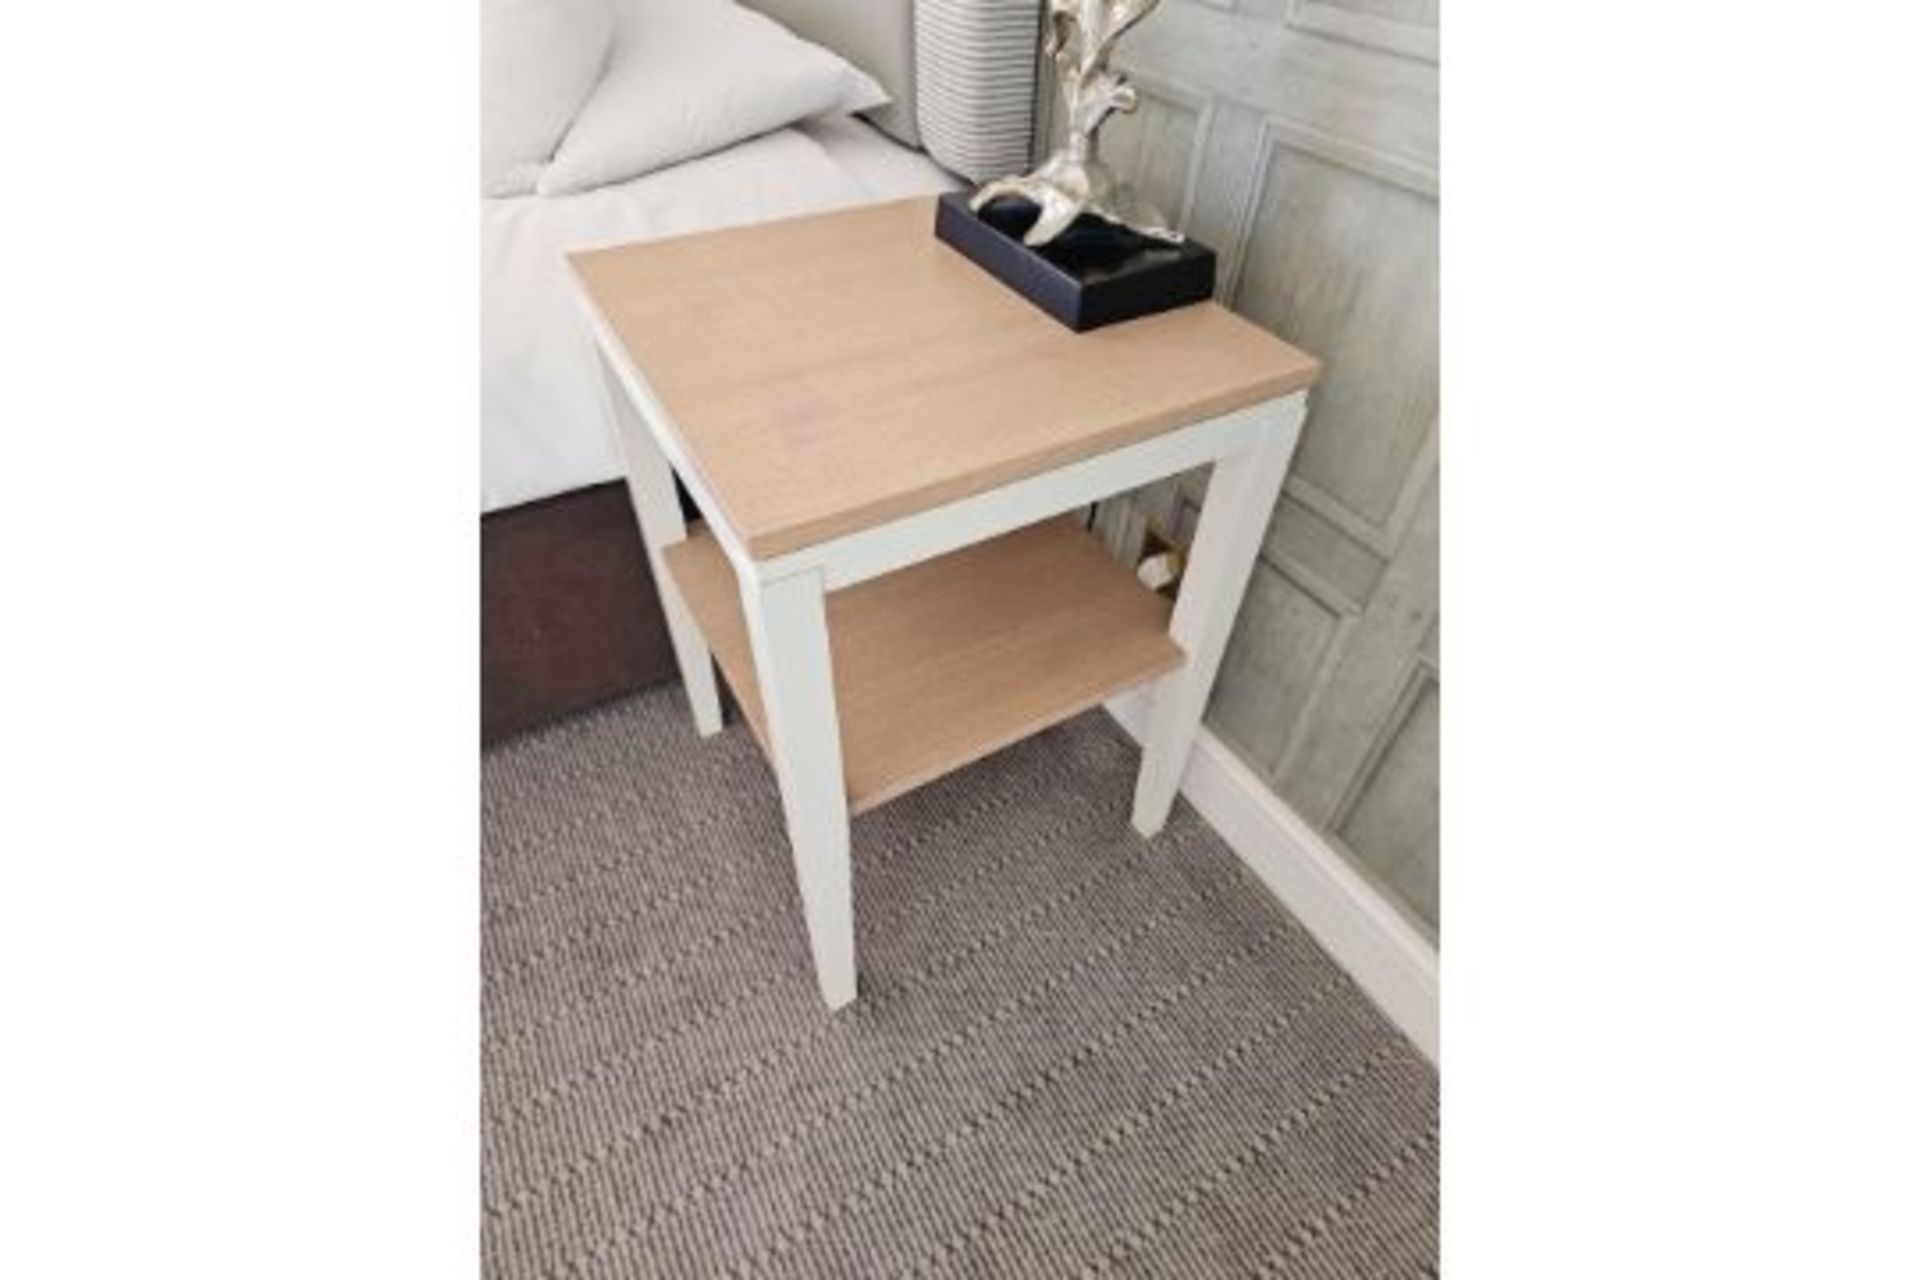 A Pair Of Side Tables A Stylish And Modern Gardenia White Painted Side Table With Undershelf, The - Image 2 of 2